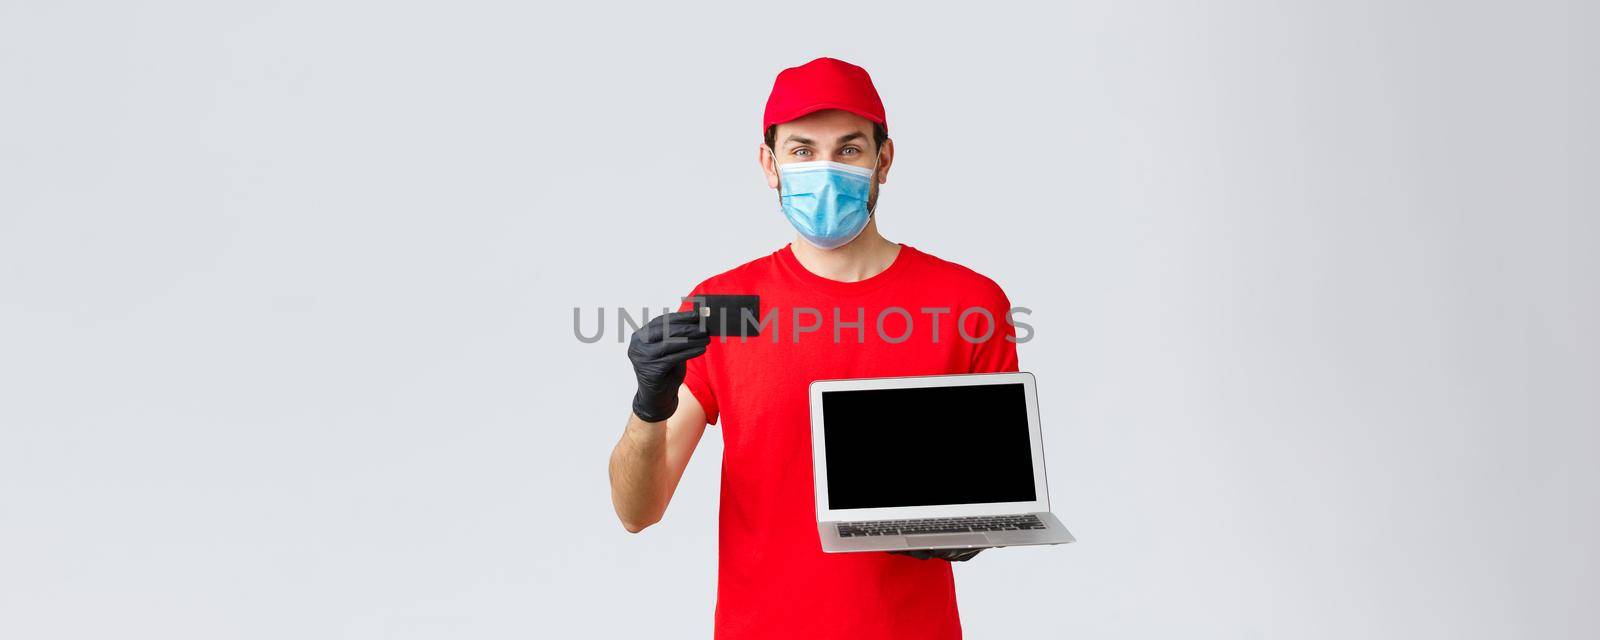 Customer support, covid-19 delivery packages, online orders processing concept. Smiling courier in red uniform cap and t-shirt, medical face mask, credit card paying for orders and show laptop.